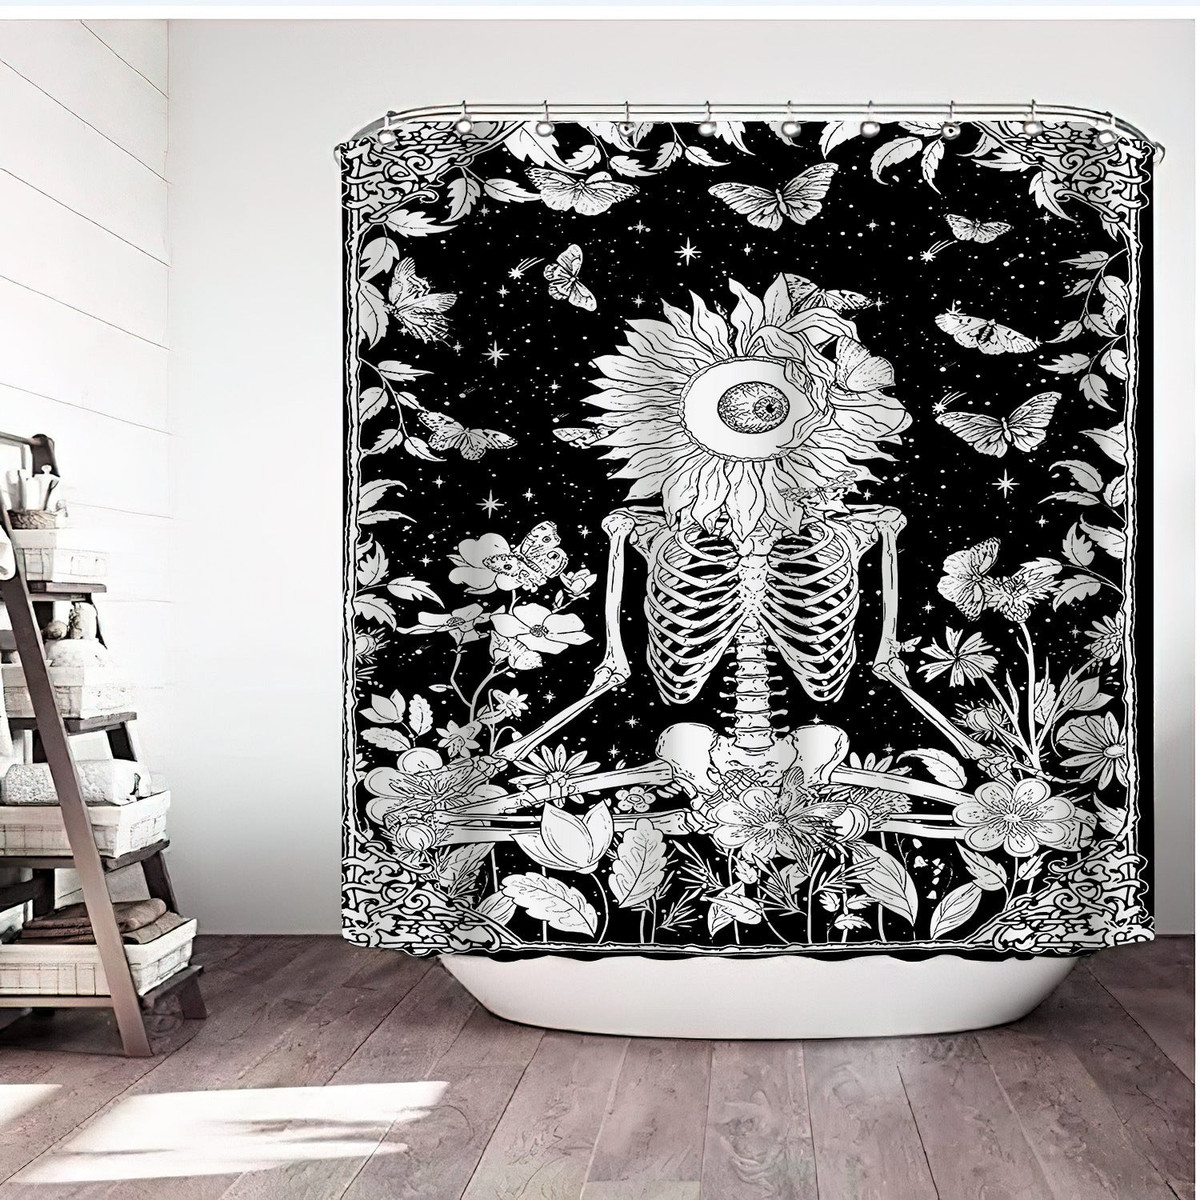 Psychedelic Meditation Skeleton Shower Curtain with Mythic Sun Butterflies